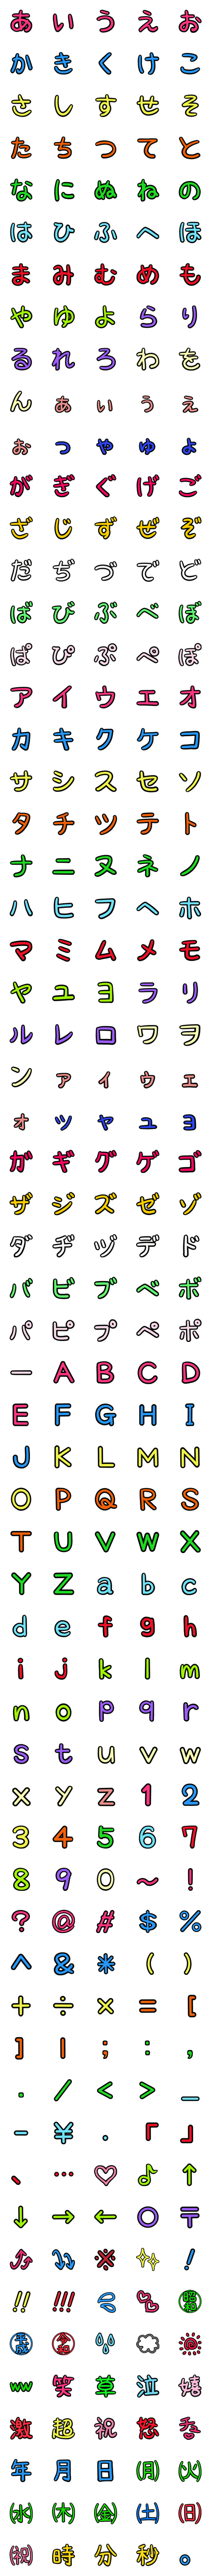 [LINE絵文字]超シンプル絵文字（縁取り絵文字）の画像一覧